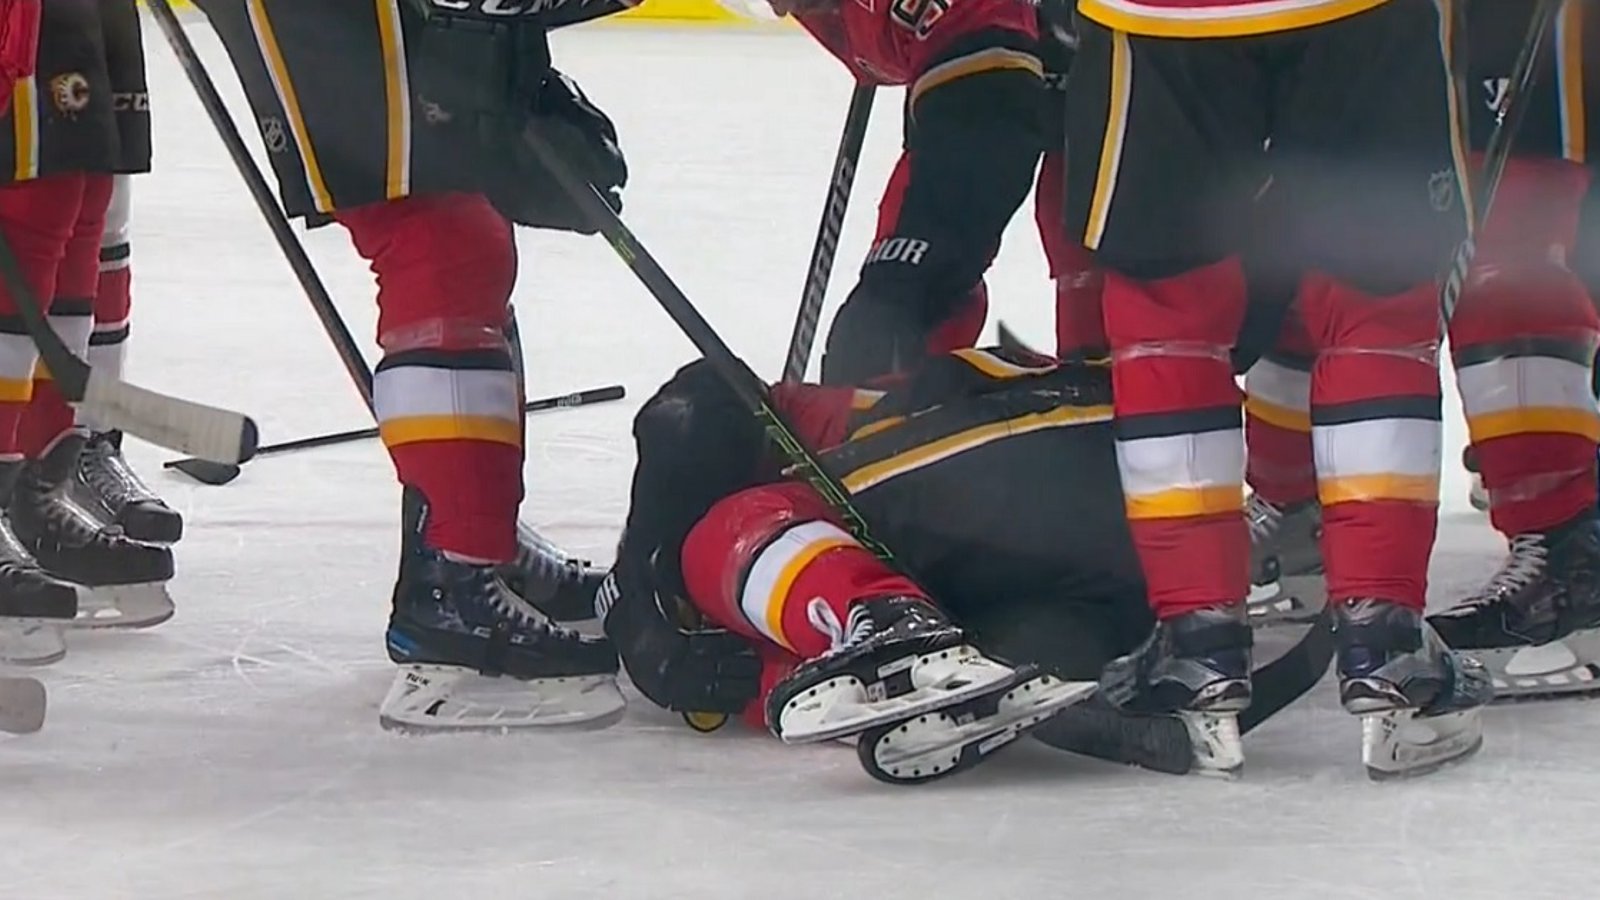 Breaking: NHL veteran goes down with a knee injury, then takes a slap shot to the head.